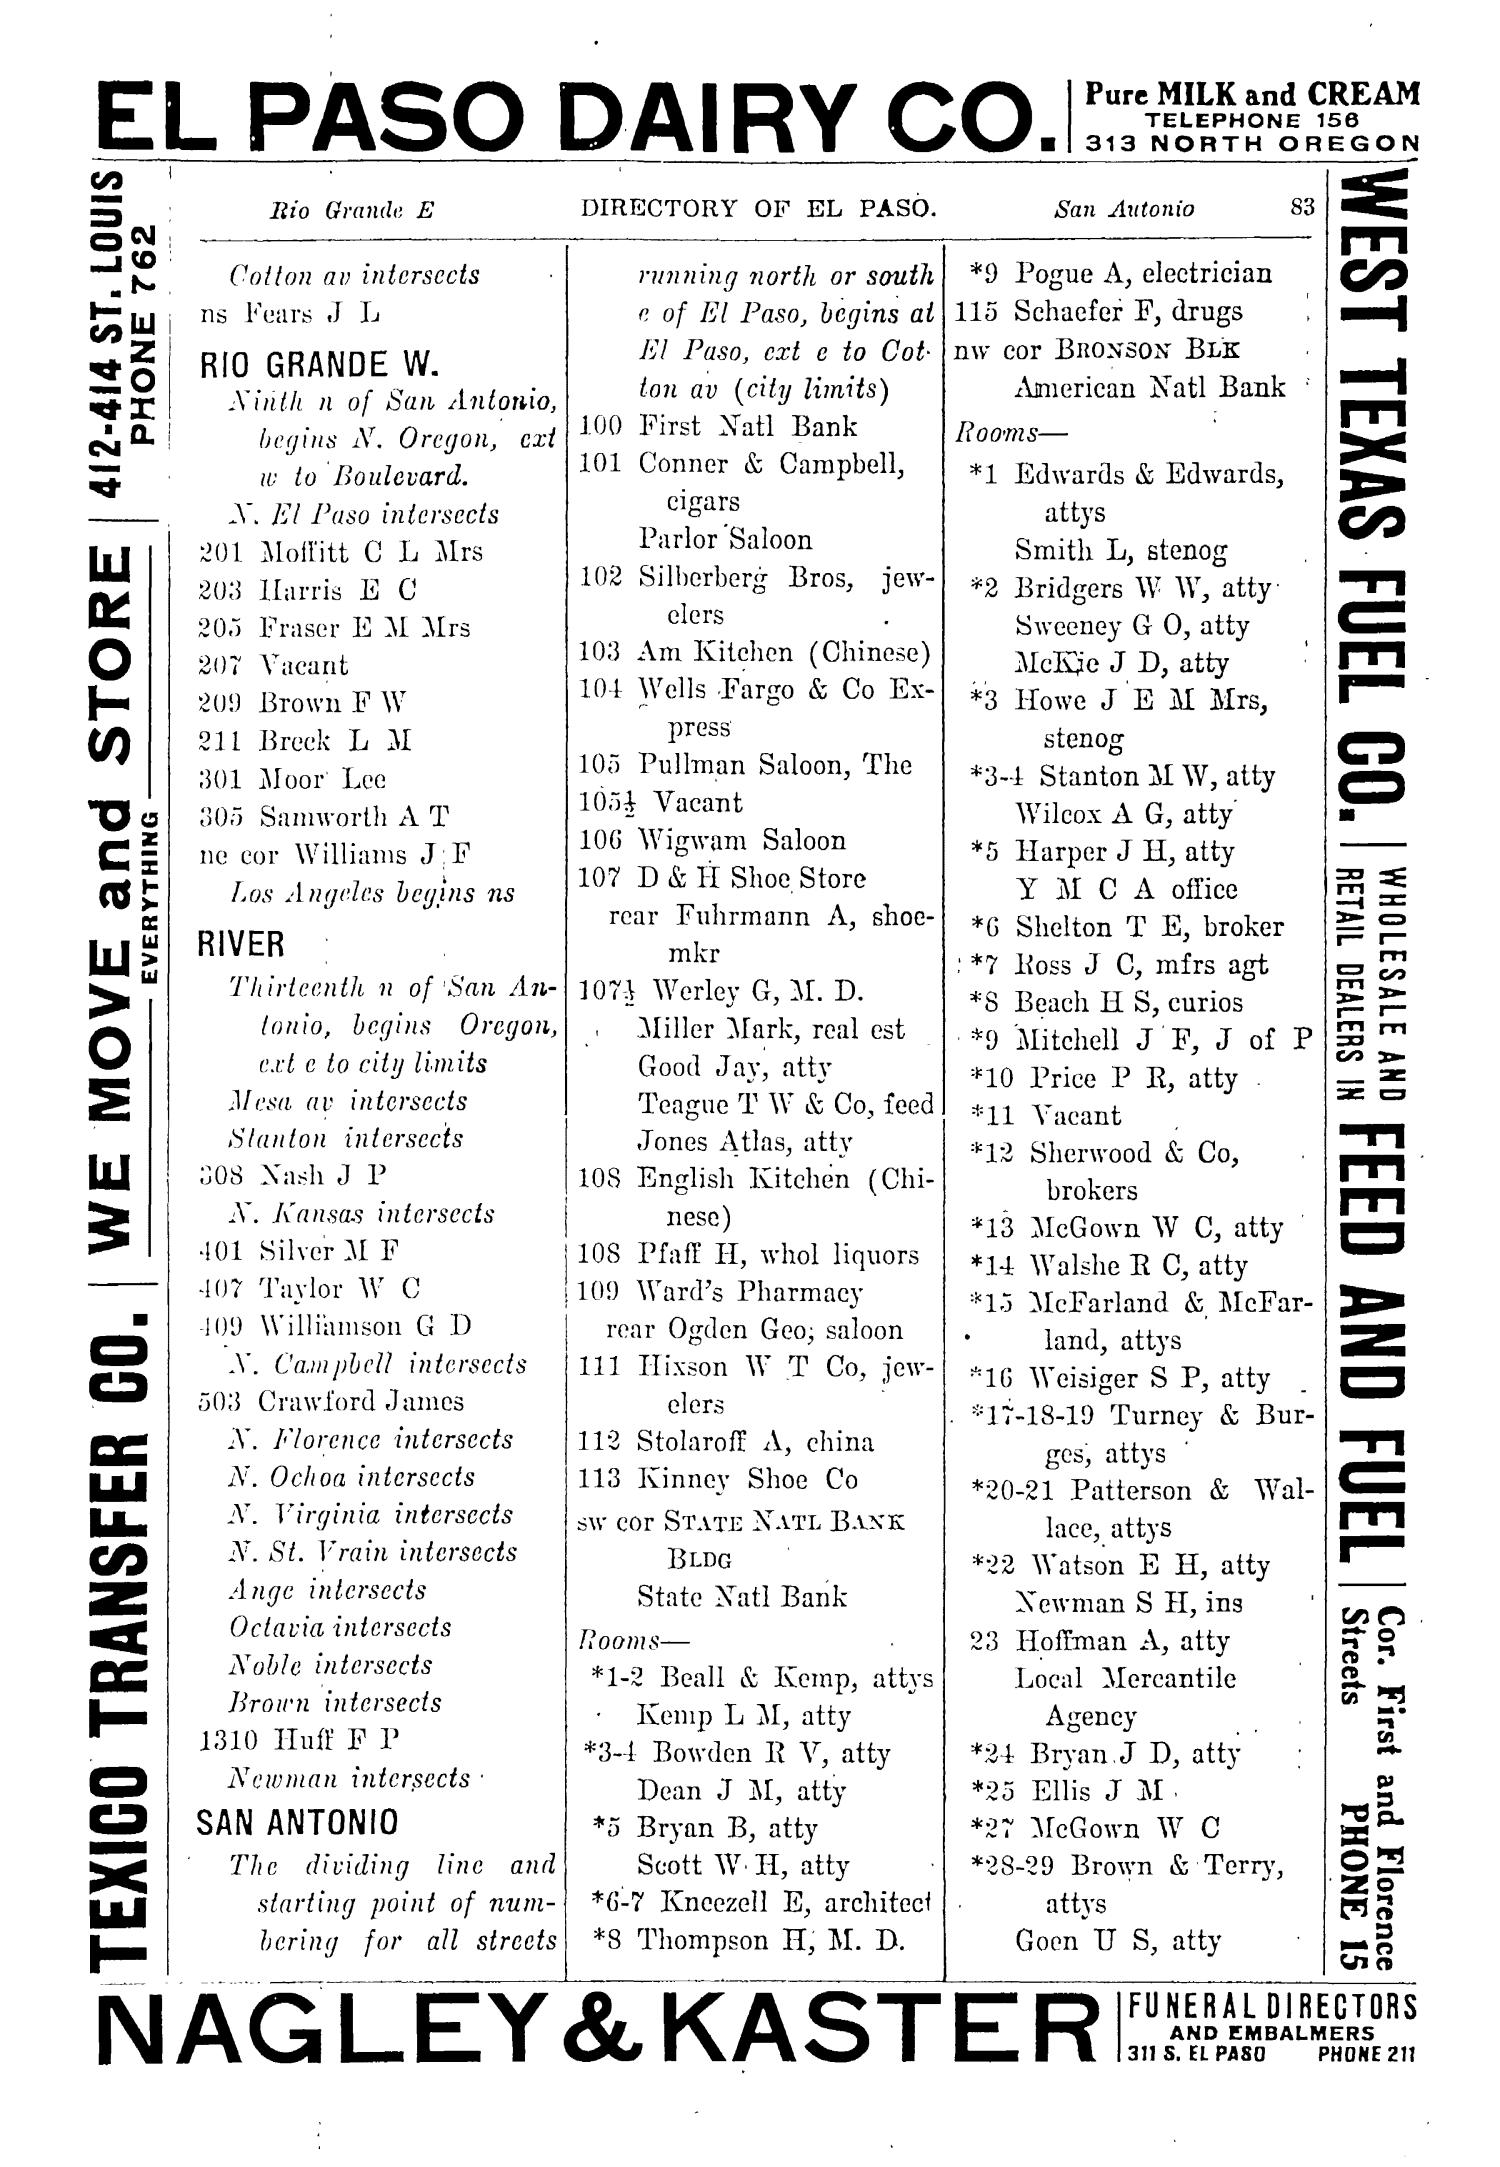 John F. Worley & Co.'s El Paso Directory for 1906
                                                
                                                    83
                                                